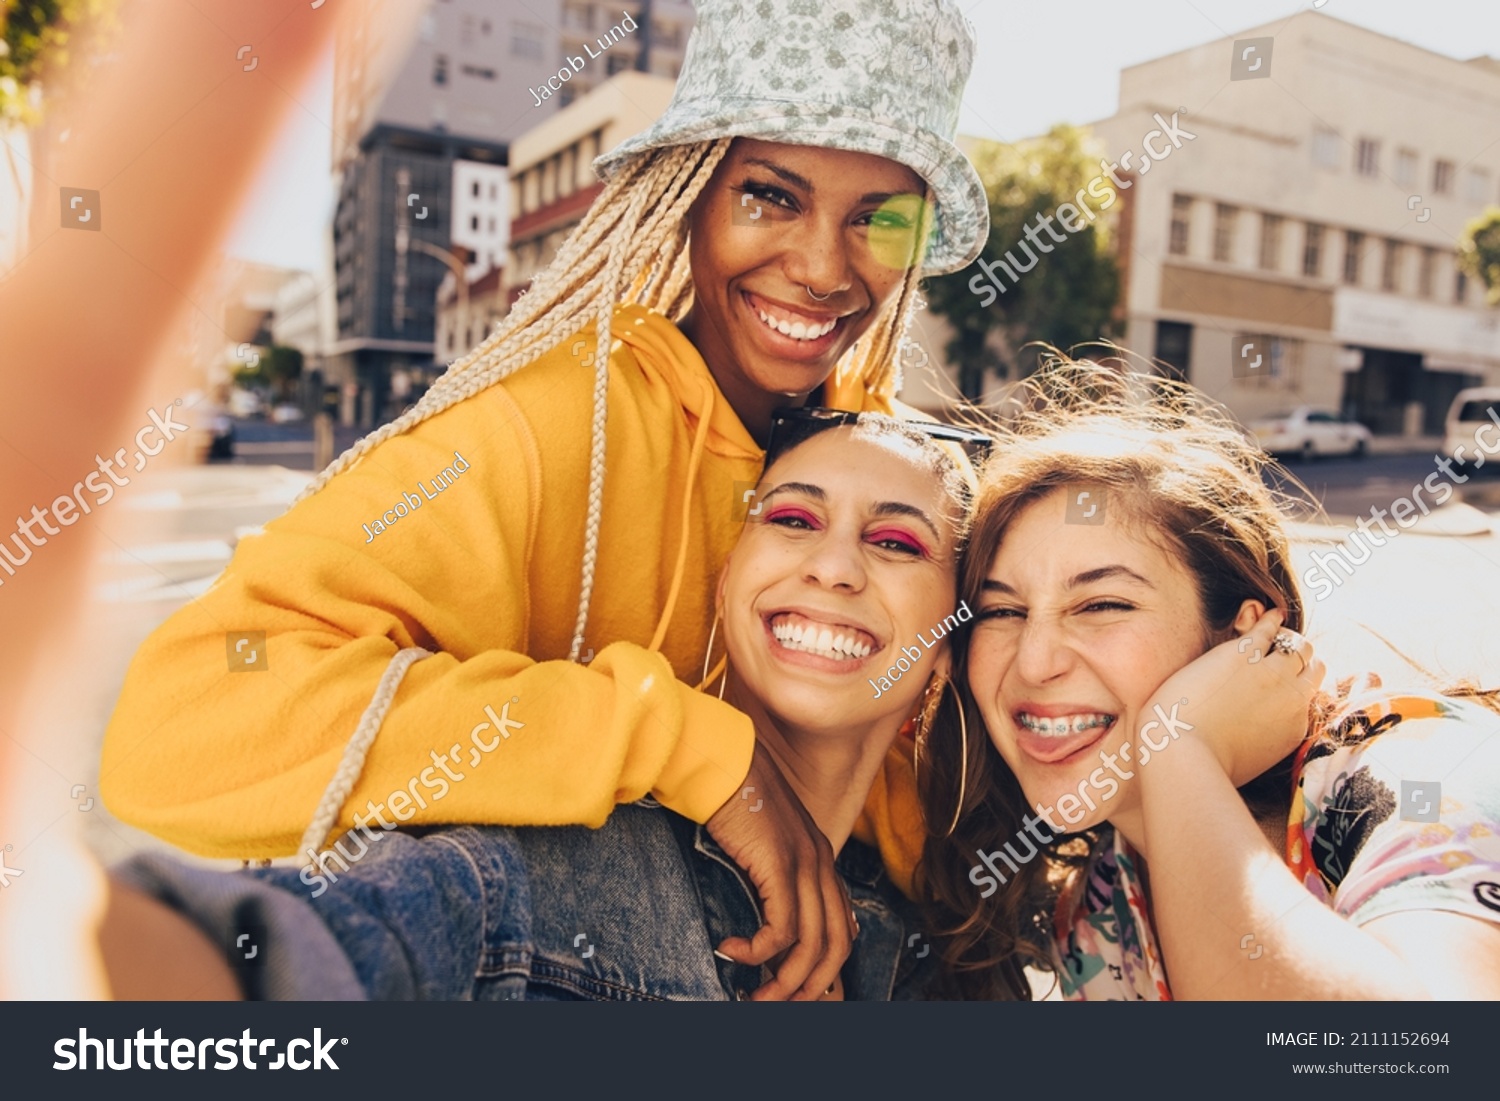 Trio of friends taking a selfie together. Group of multiethnic female friends having fun together outdoors. Cheerful generation z friends capturing their happy moments in the city. #2111152694